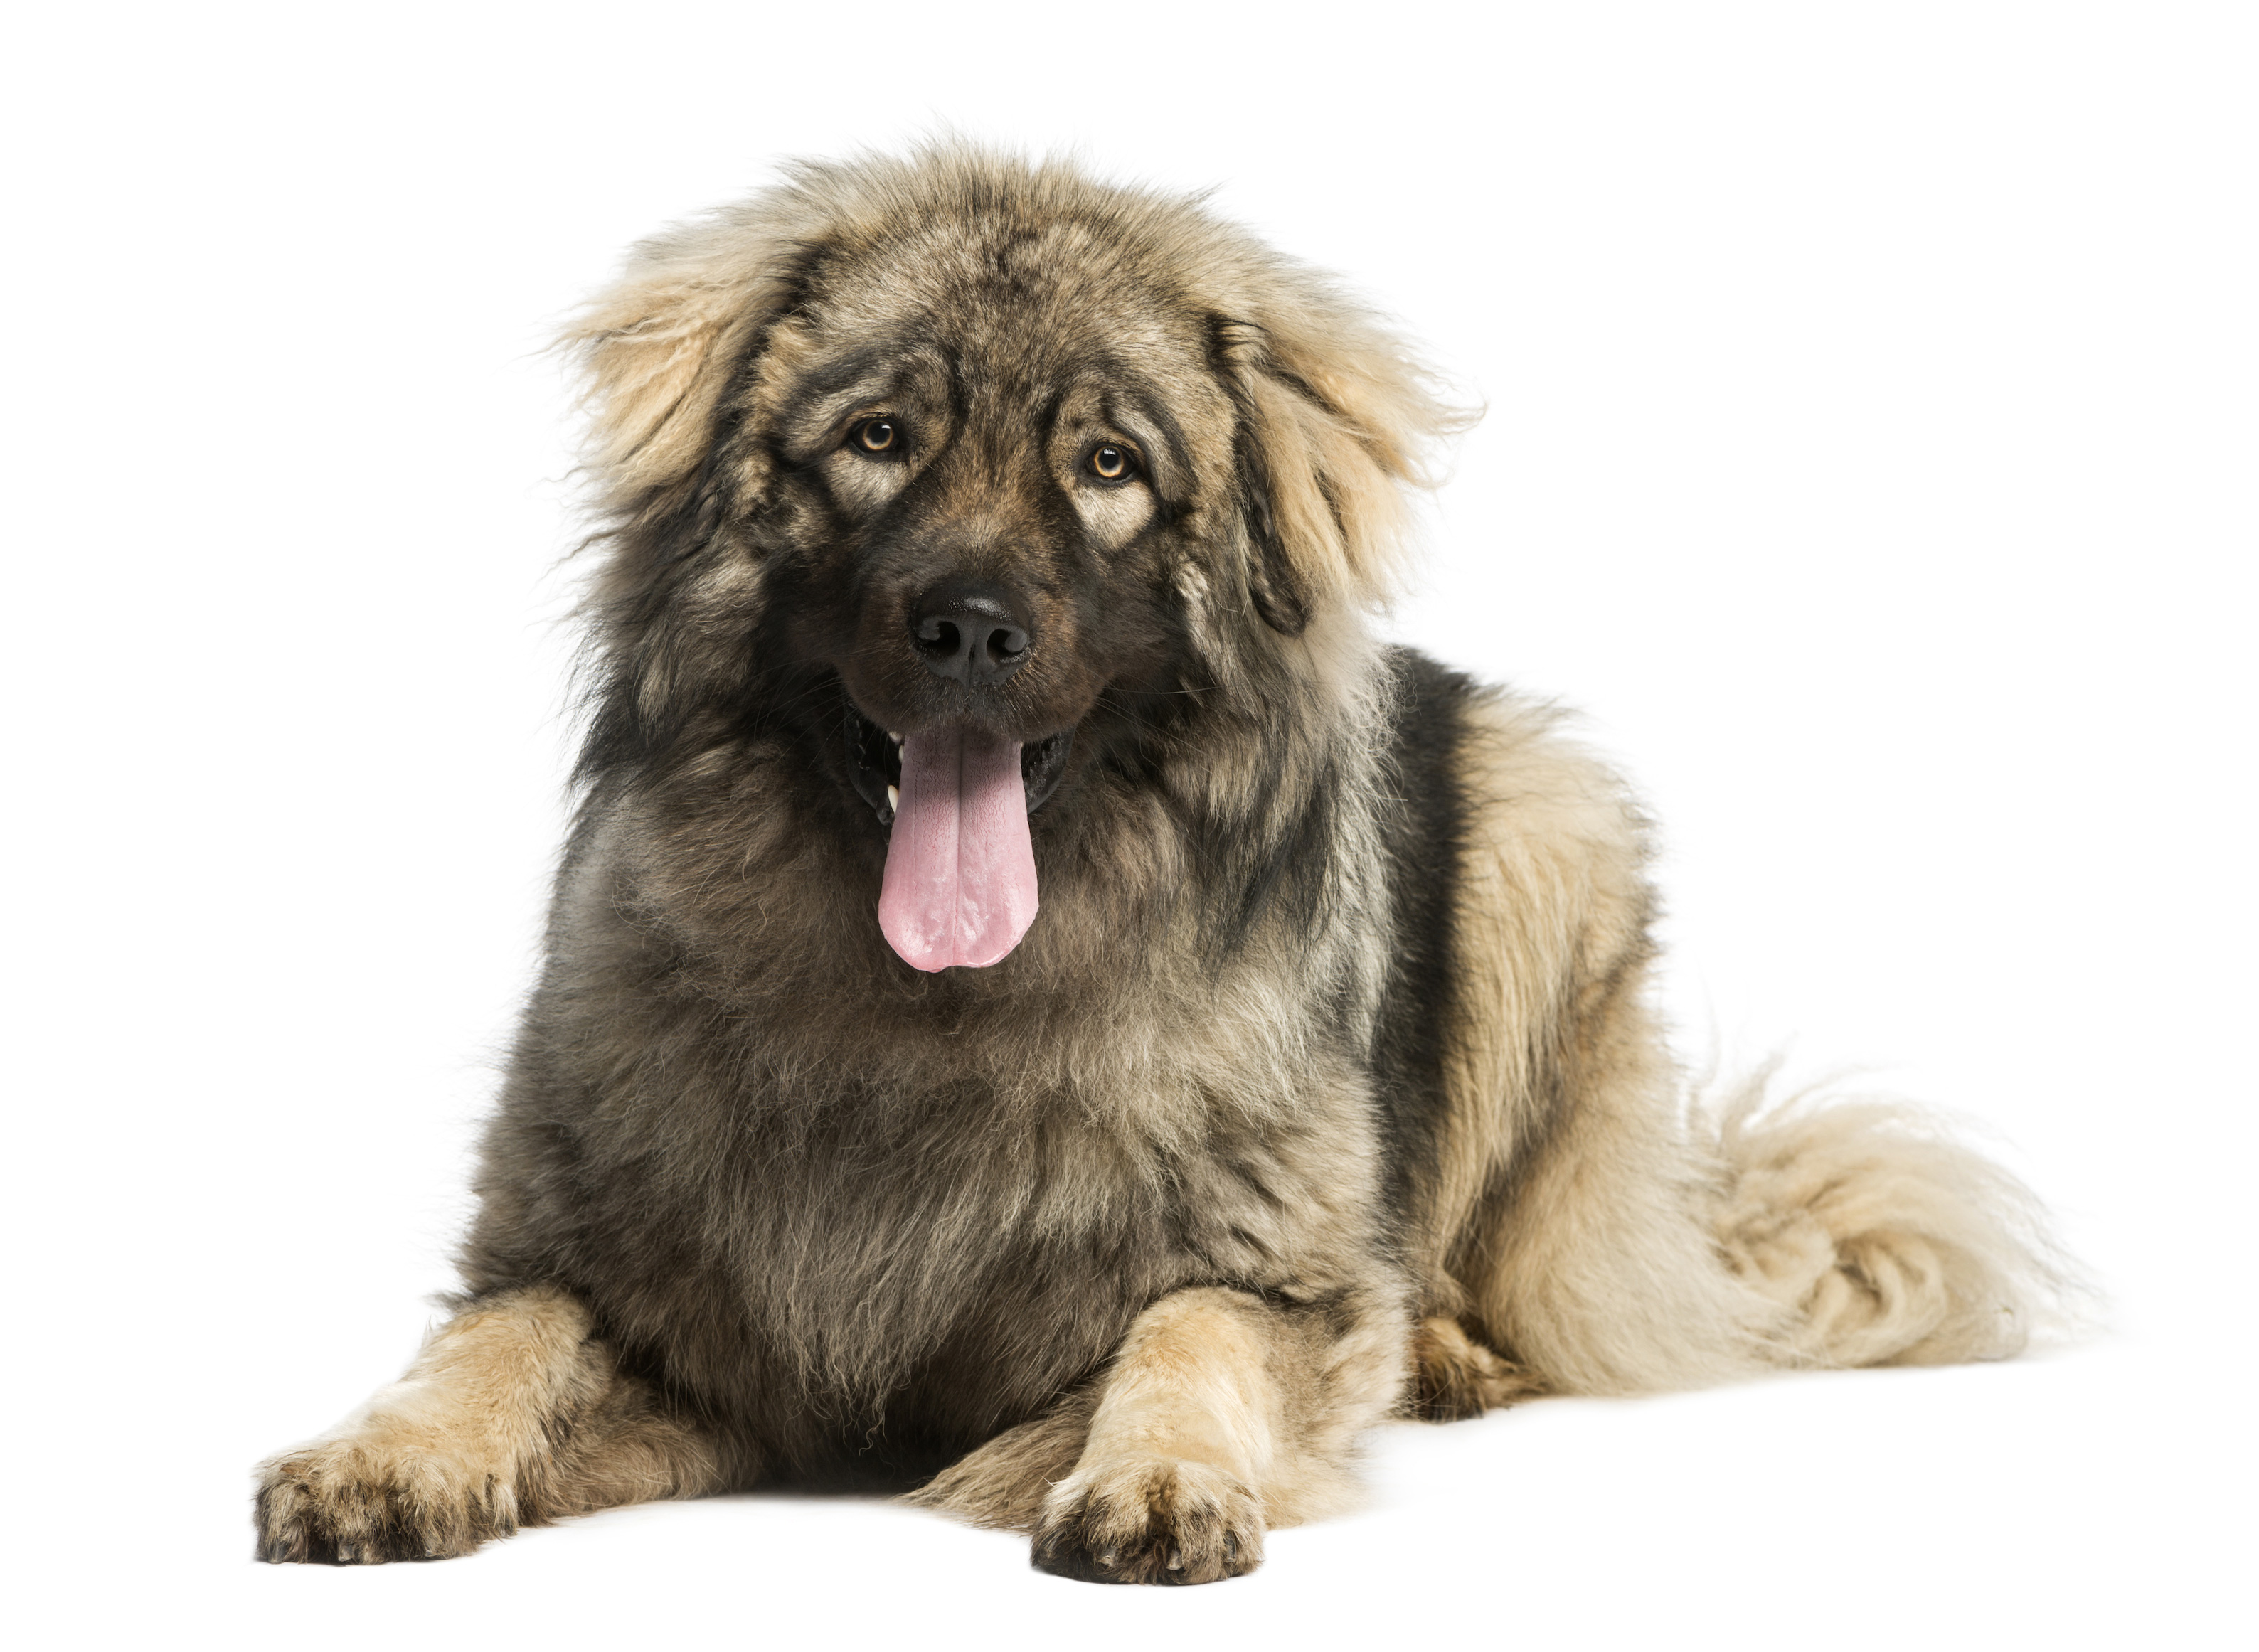 Pets with Chronic Conditions